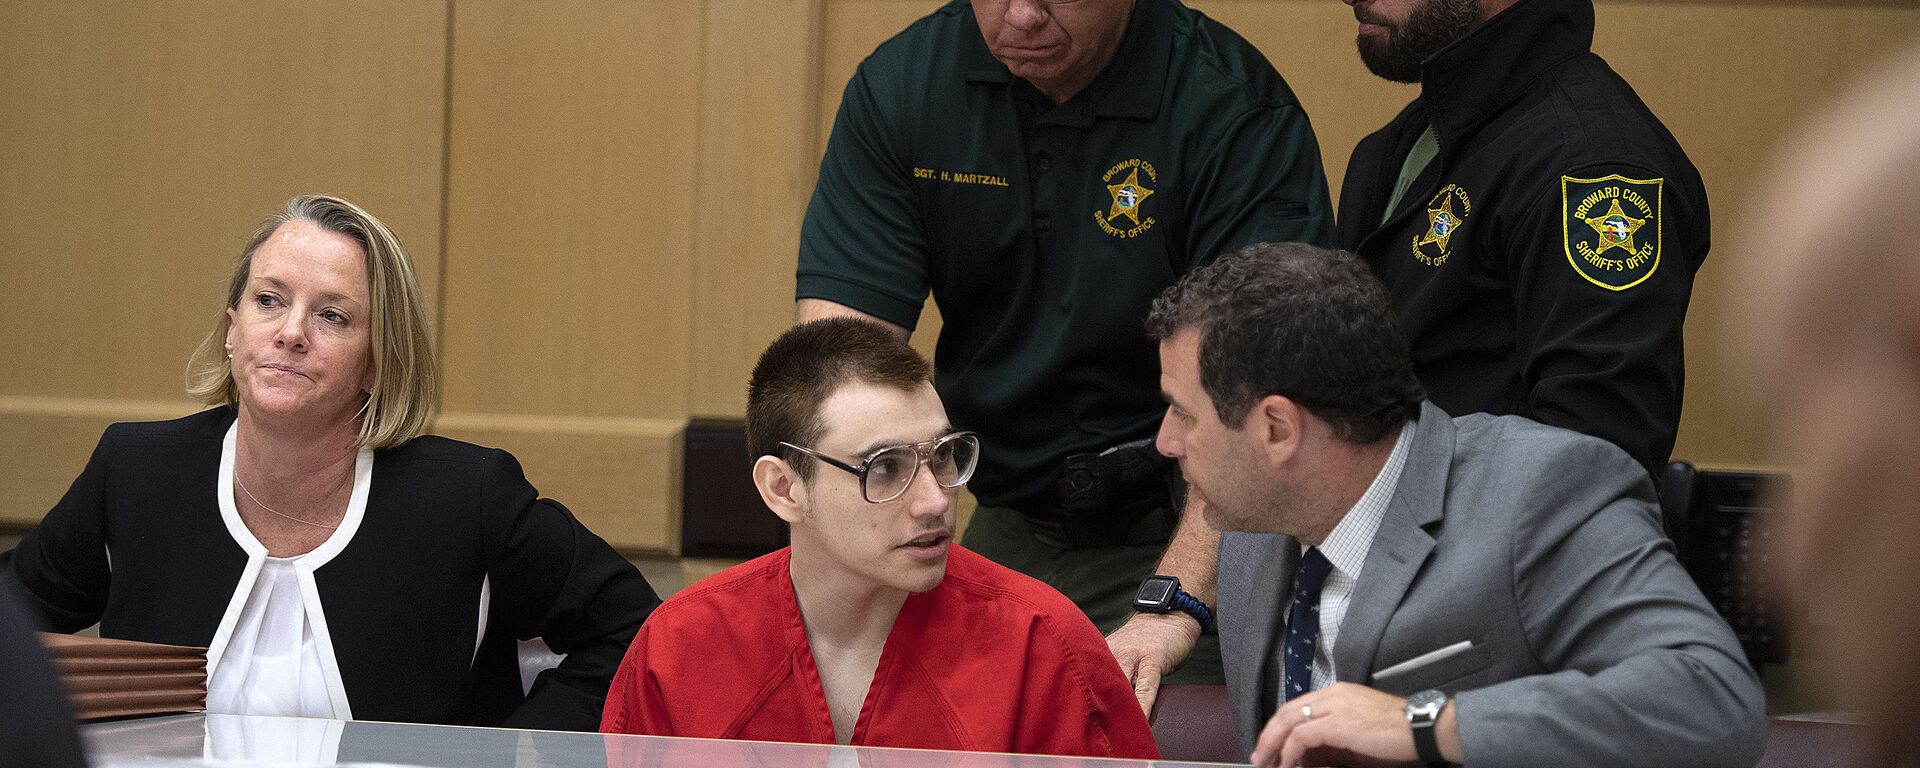 Florida school shooting defendant Nikolas Cruz speaks with attorney Gabe Ermine in Judge Elizabeth Scherer's courtroom at the Broward County Courthouse, Thursday, Dec. 19, 2019, in Fort Lauderdale, Fla. The trial of Parkland school shooting defendant Nikolas Cruz was delayed Thursday until at least next summer, when he will face a death penalty case stemming from the February 2018 massacre that left 17 people dead. - Sputnik International, 1920, 13.10.2022